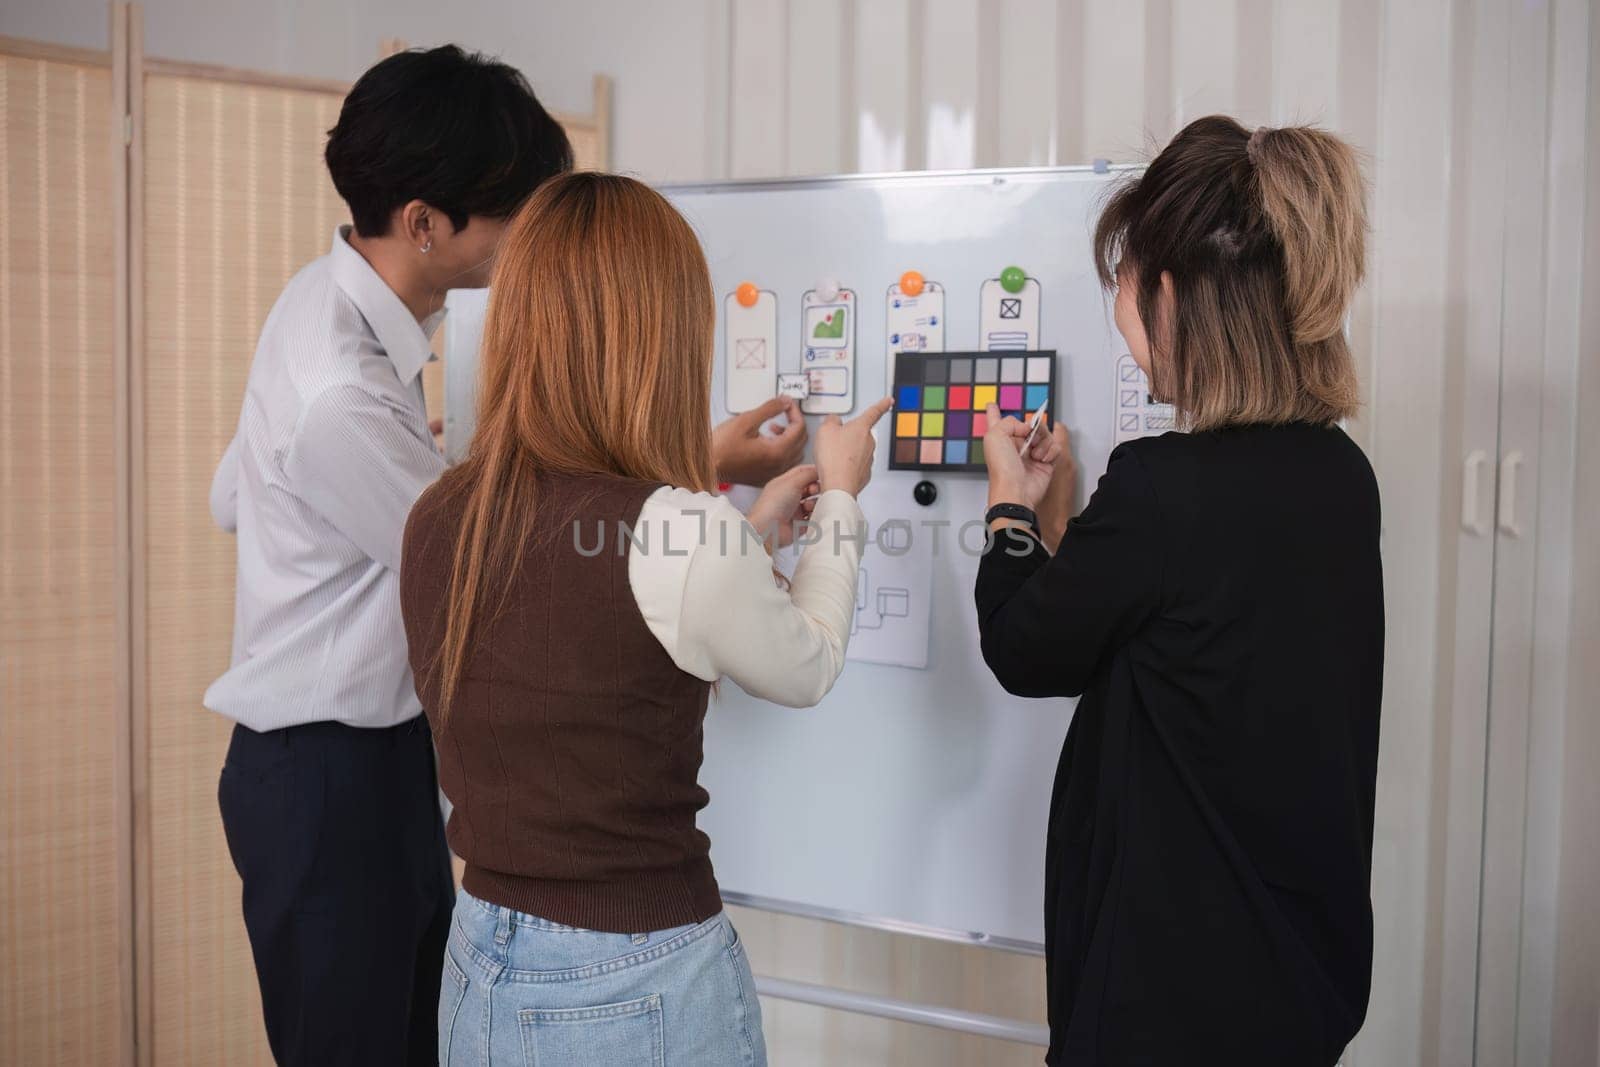 A team of software developers brainstormed to design a smartphone application by planning on a whiteboard and using it to develop the application system..